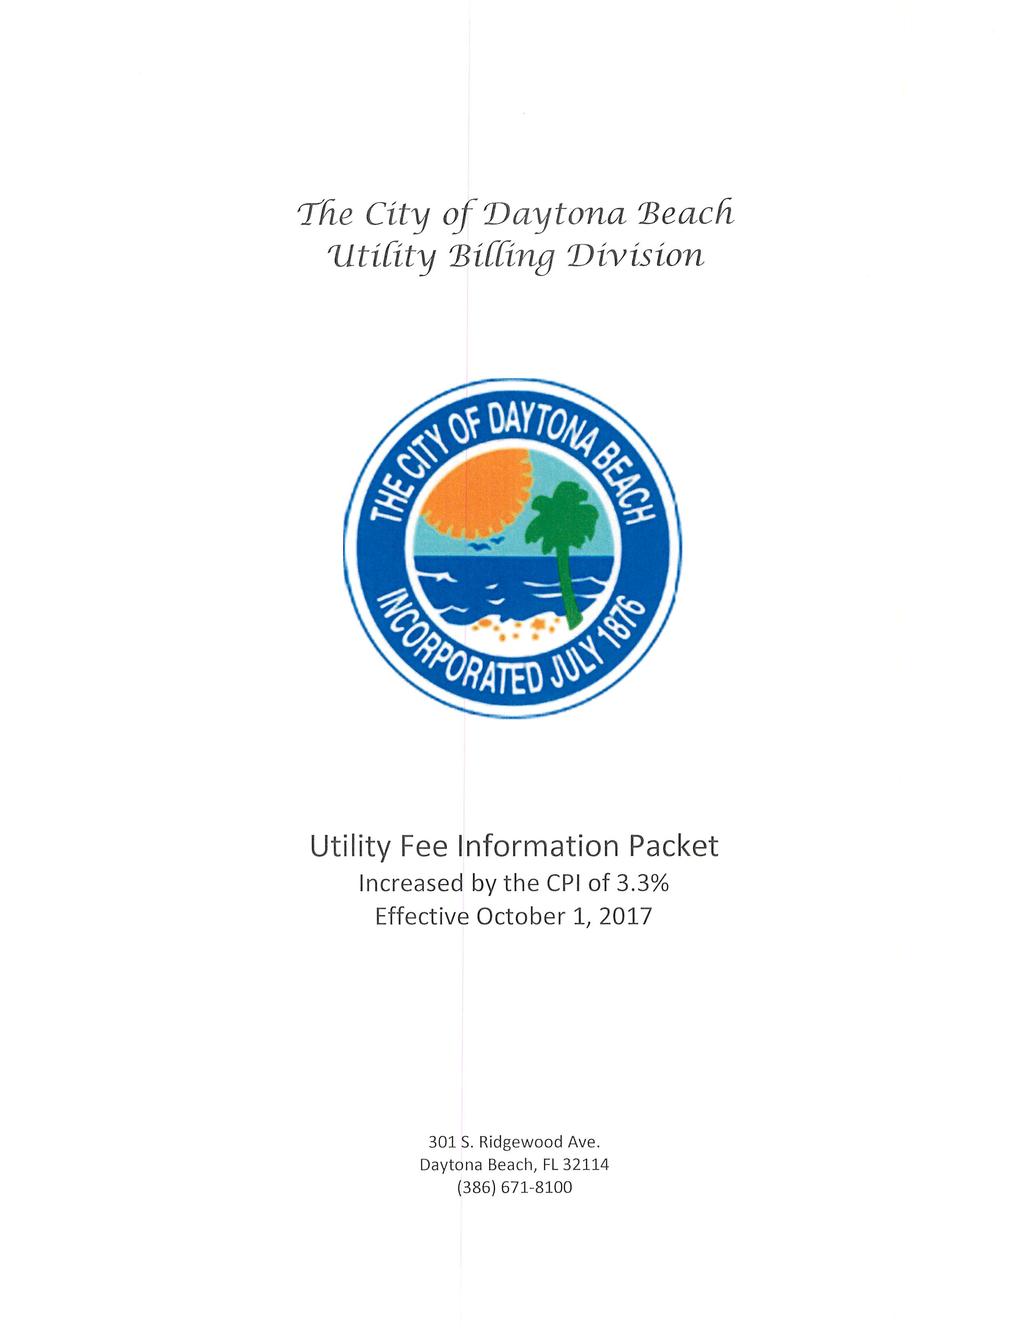 "The City ofvaytona Beach UtiCity BiCCing Division Utility Fee Information Packet Increased by